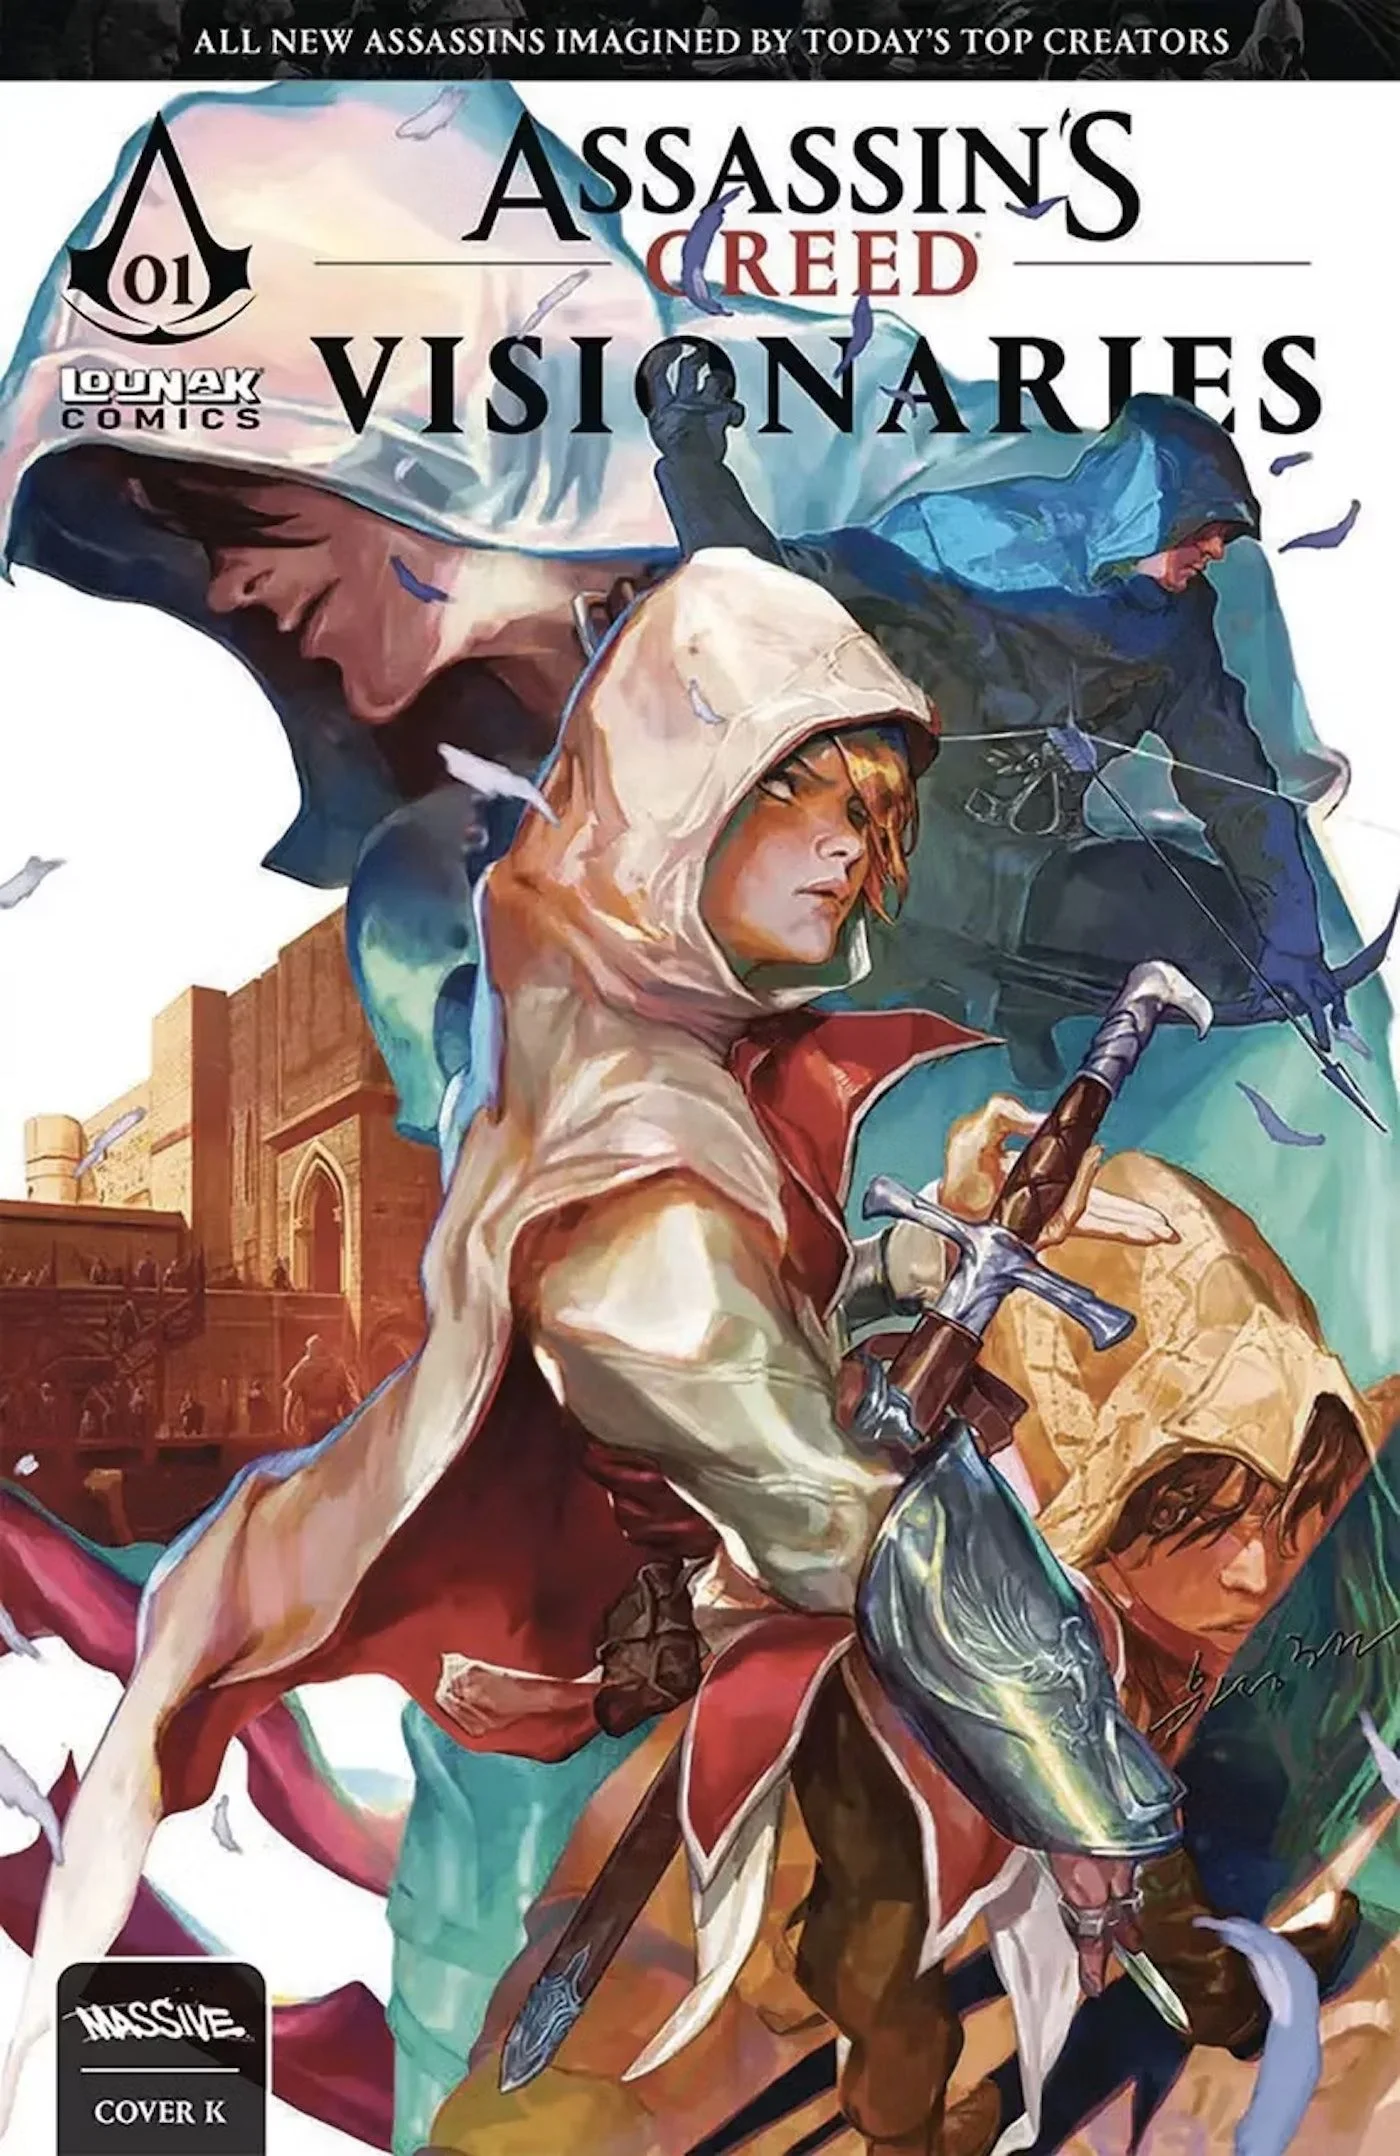 Assassin's Creed's New Twist: From Historical Adventures to a Dystopian 2119?!